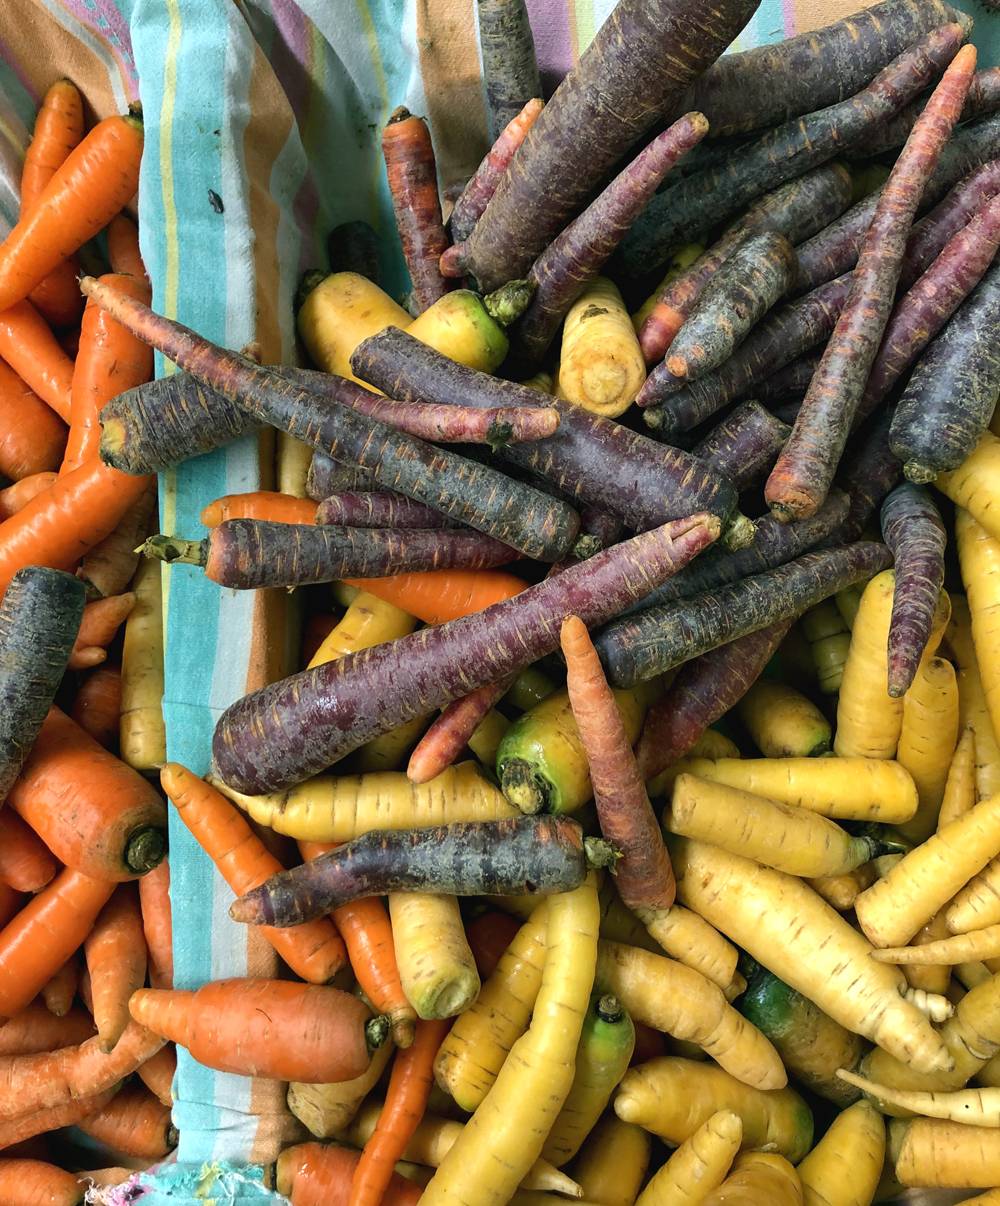 Orange, yellow, and purple carrots in two rectangular containers. The containters are lined with a blue, yellow, purple, and orange striped fabric. Photo by Jessica Hammie. 